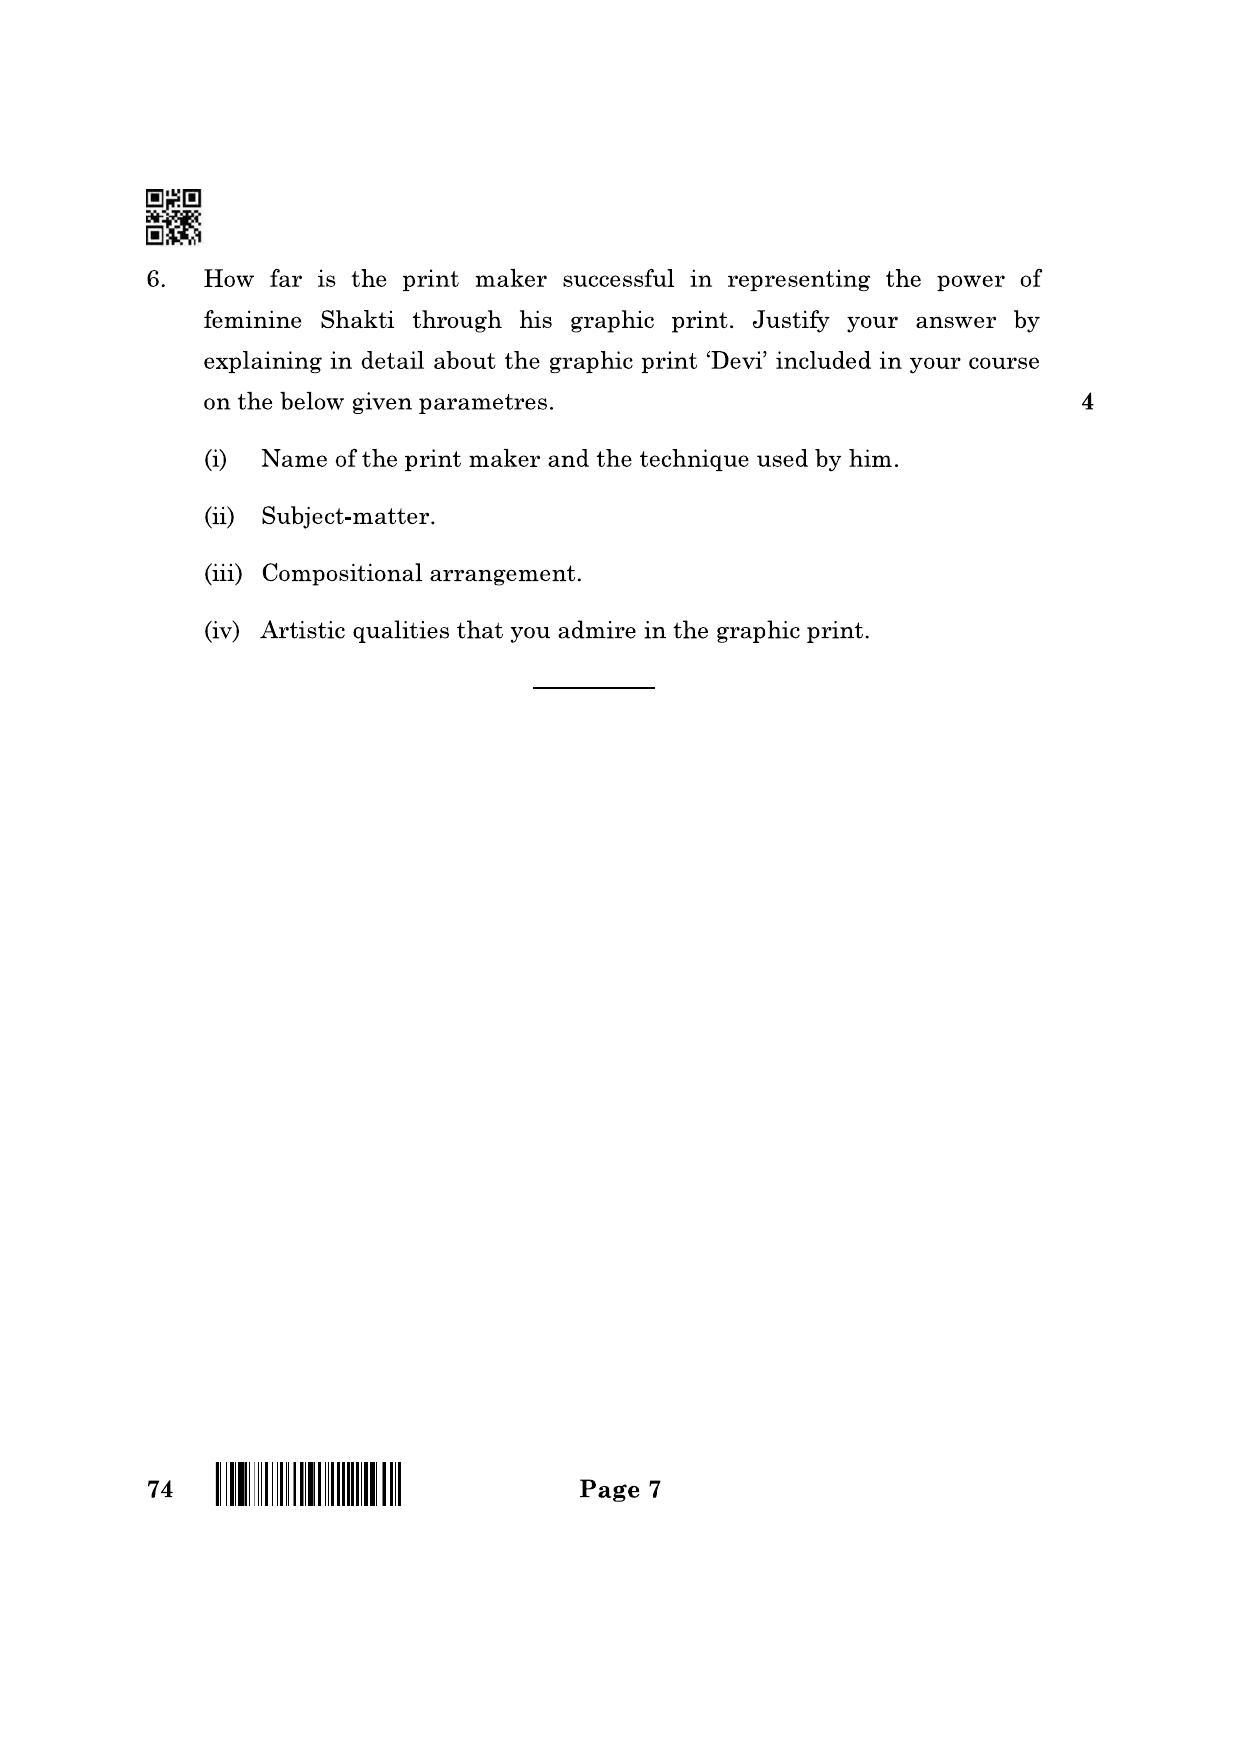 CBSE Class 12 74_Graphics 2022 Question Paper - Page 7